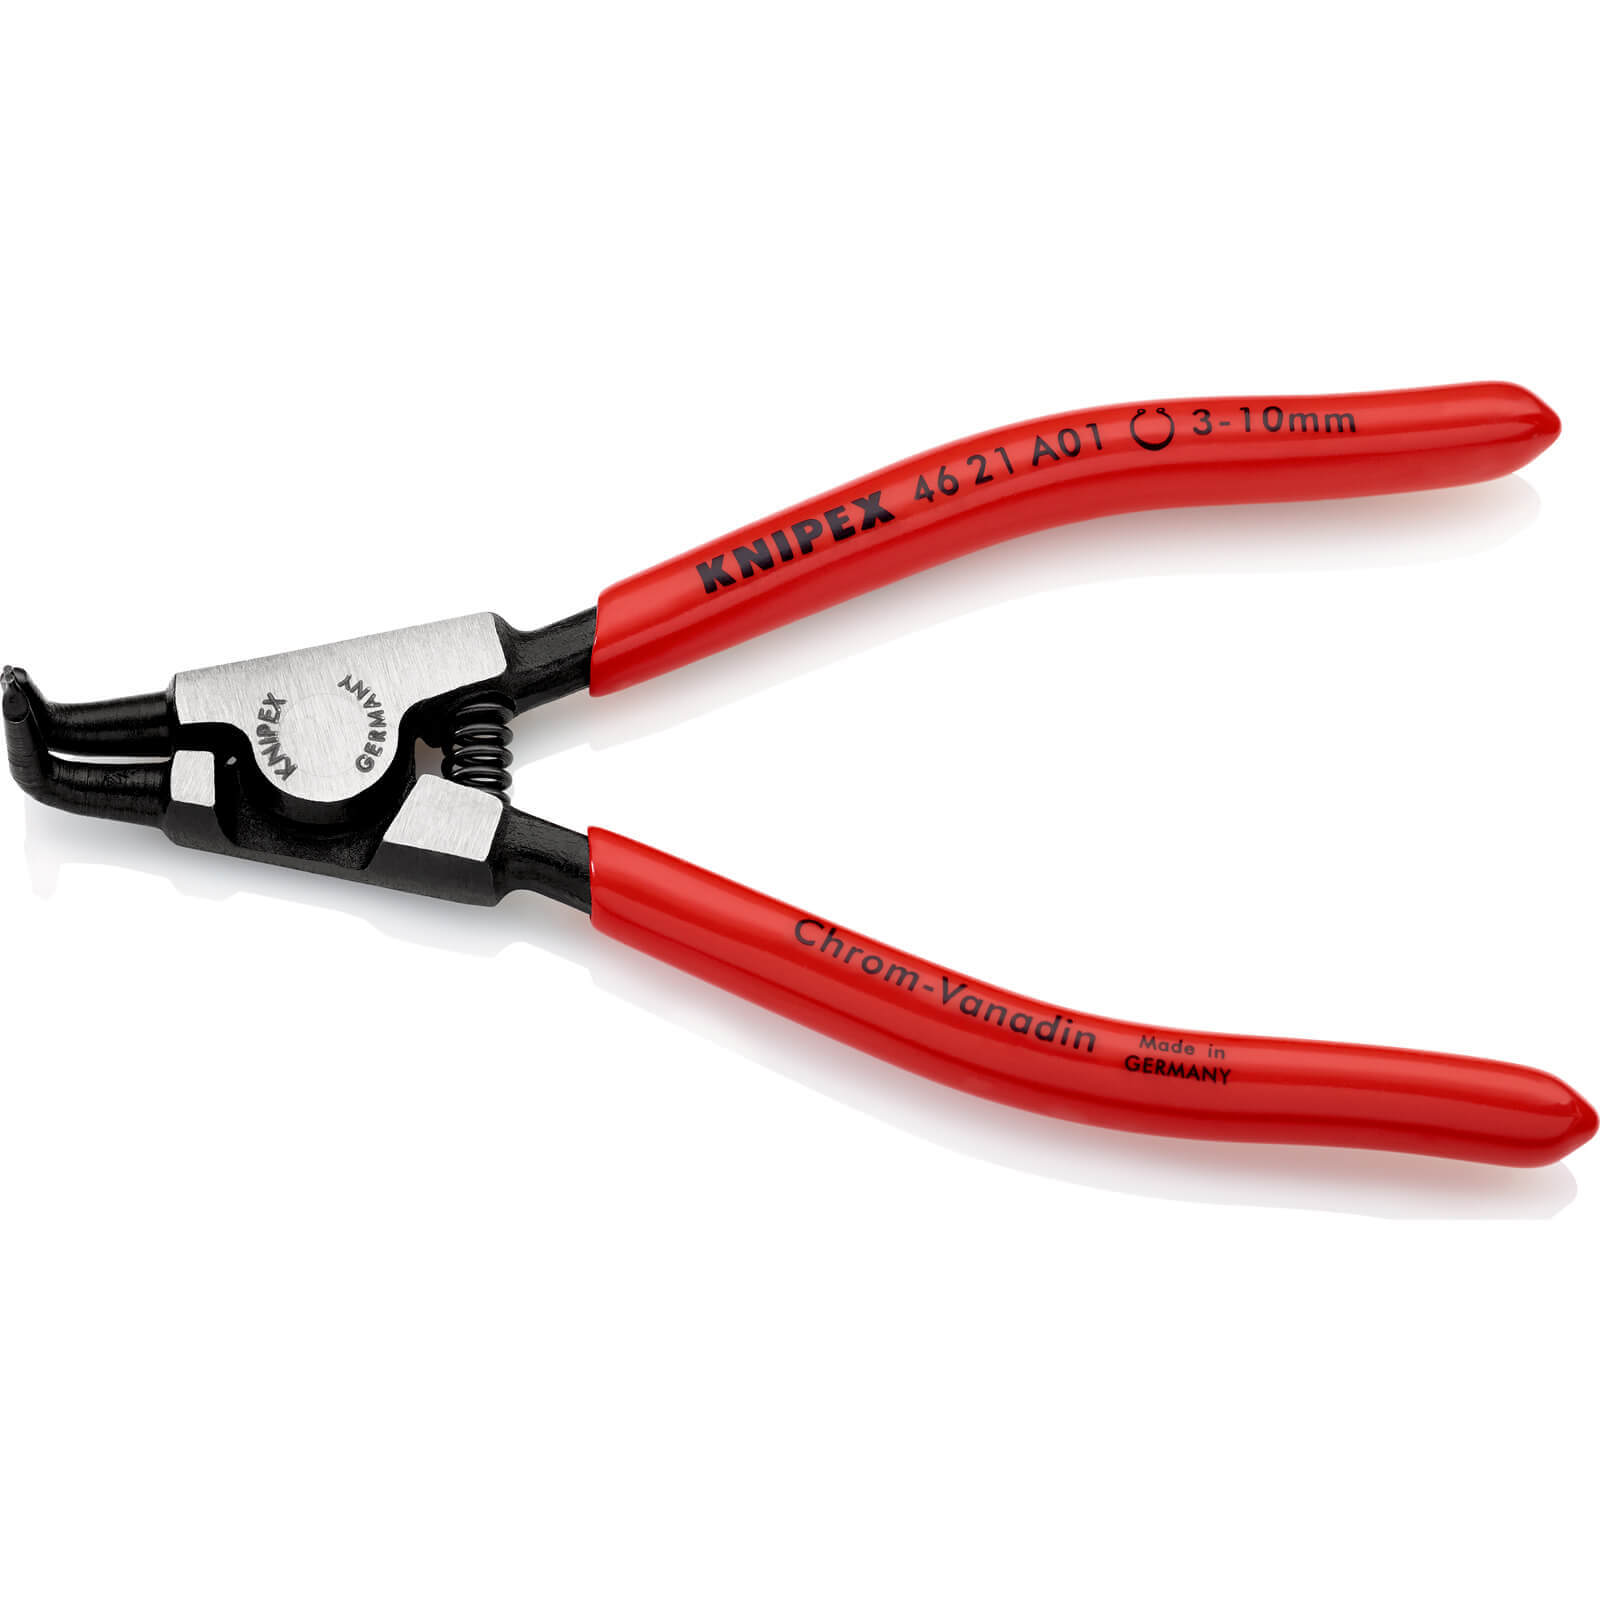 Photo of Knipex 46 21 External 90 Degree Circlip Pliers 3mm - 10mm